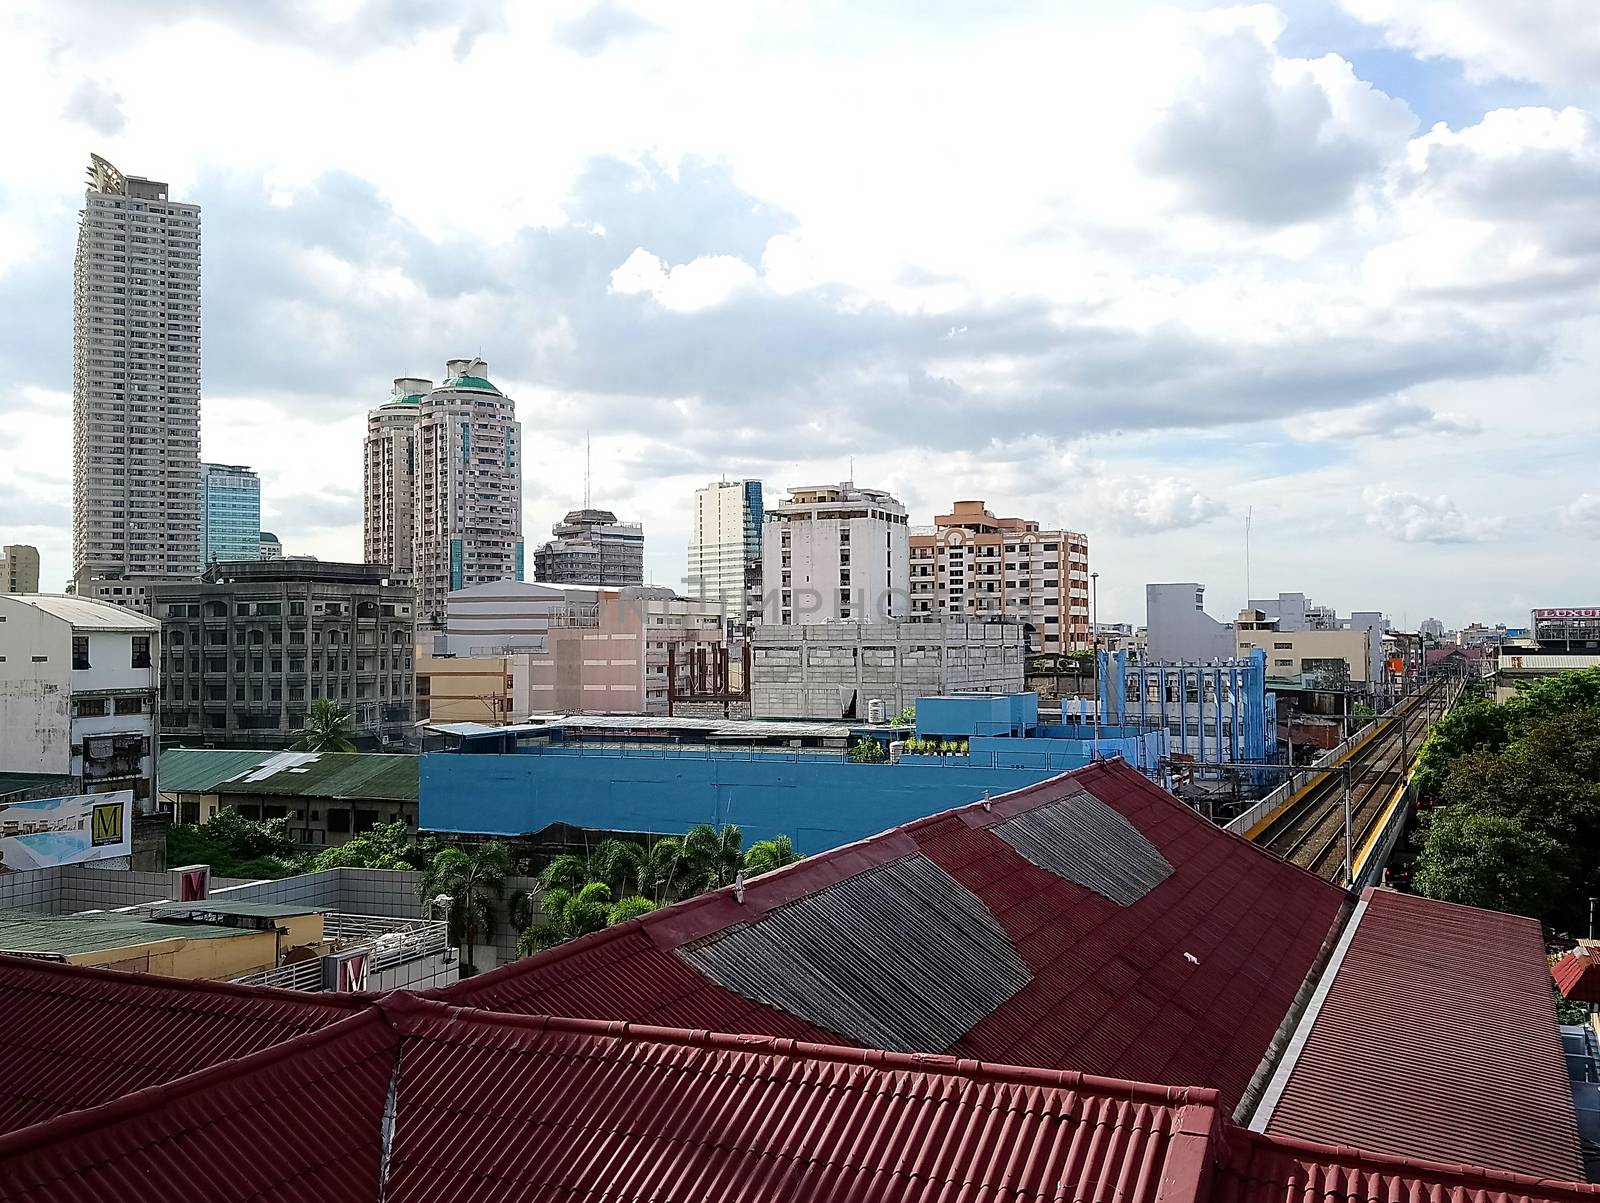 Overview of Manila city and buildings during daytime by imwaltersy